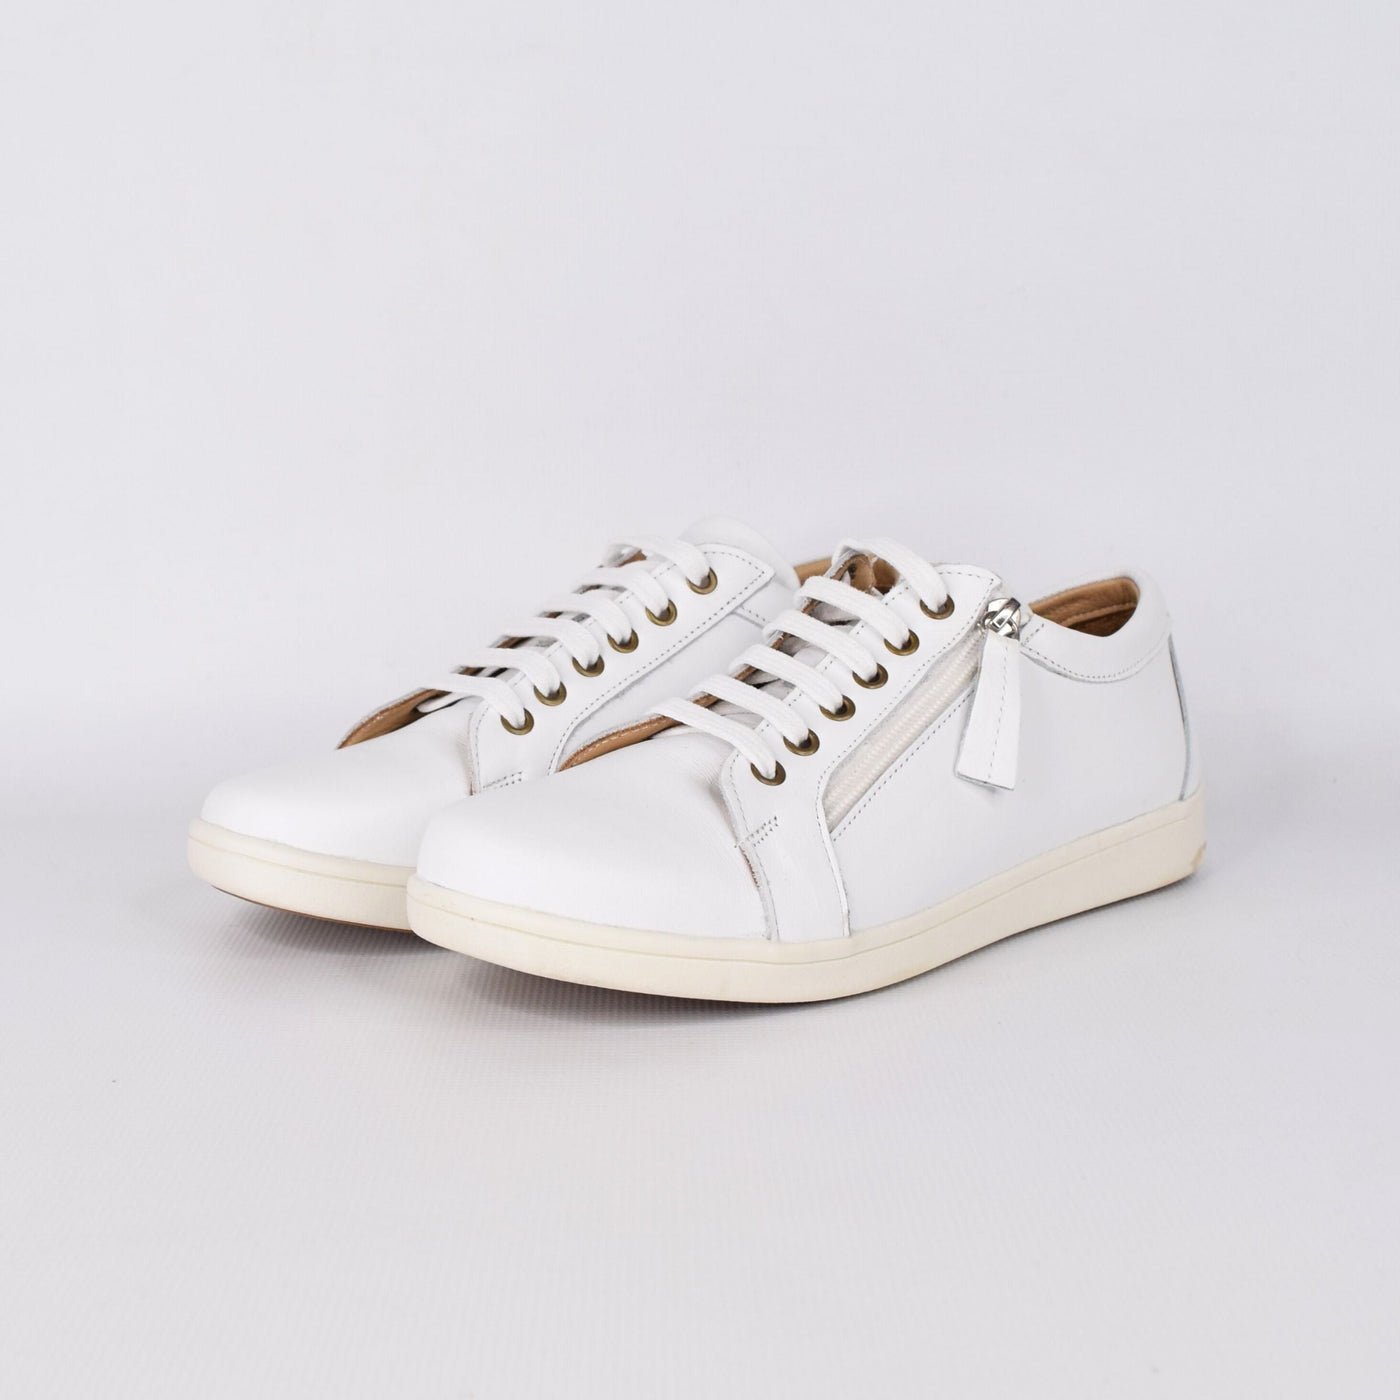 Hami White by Tesselli | Womens Sneaker by White Backdrop Leather Lined and Upper